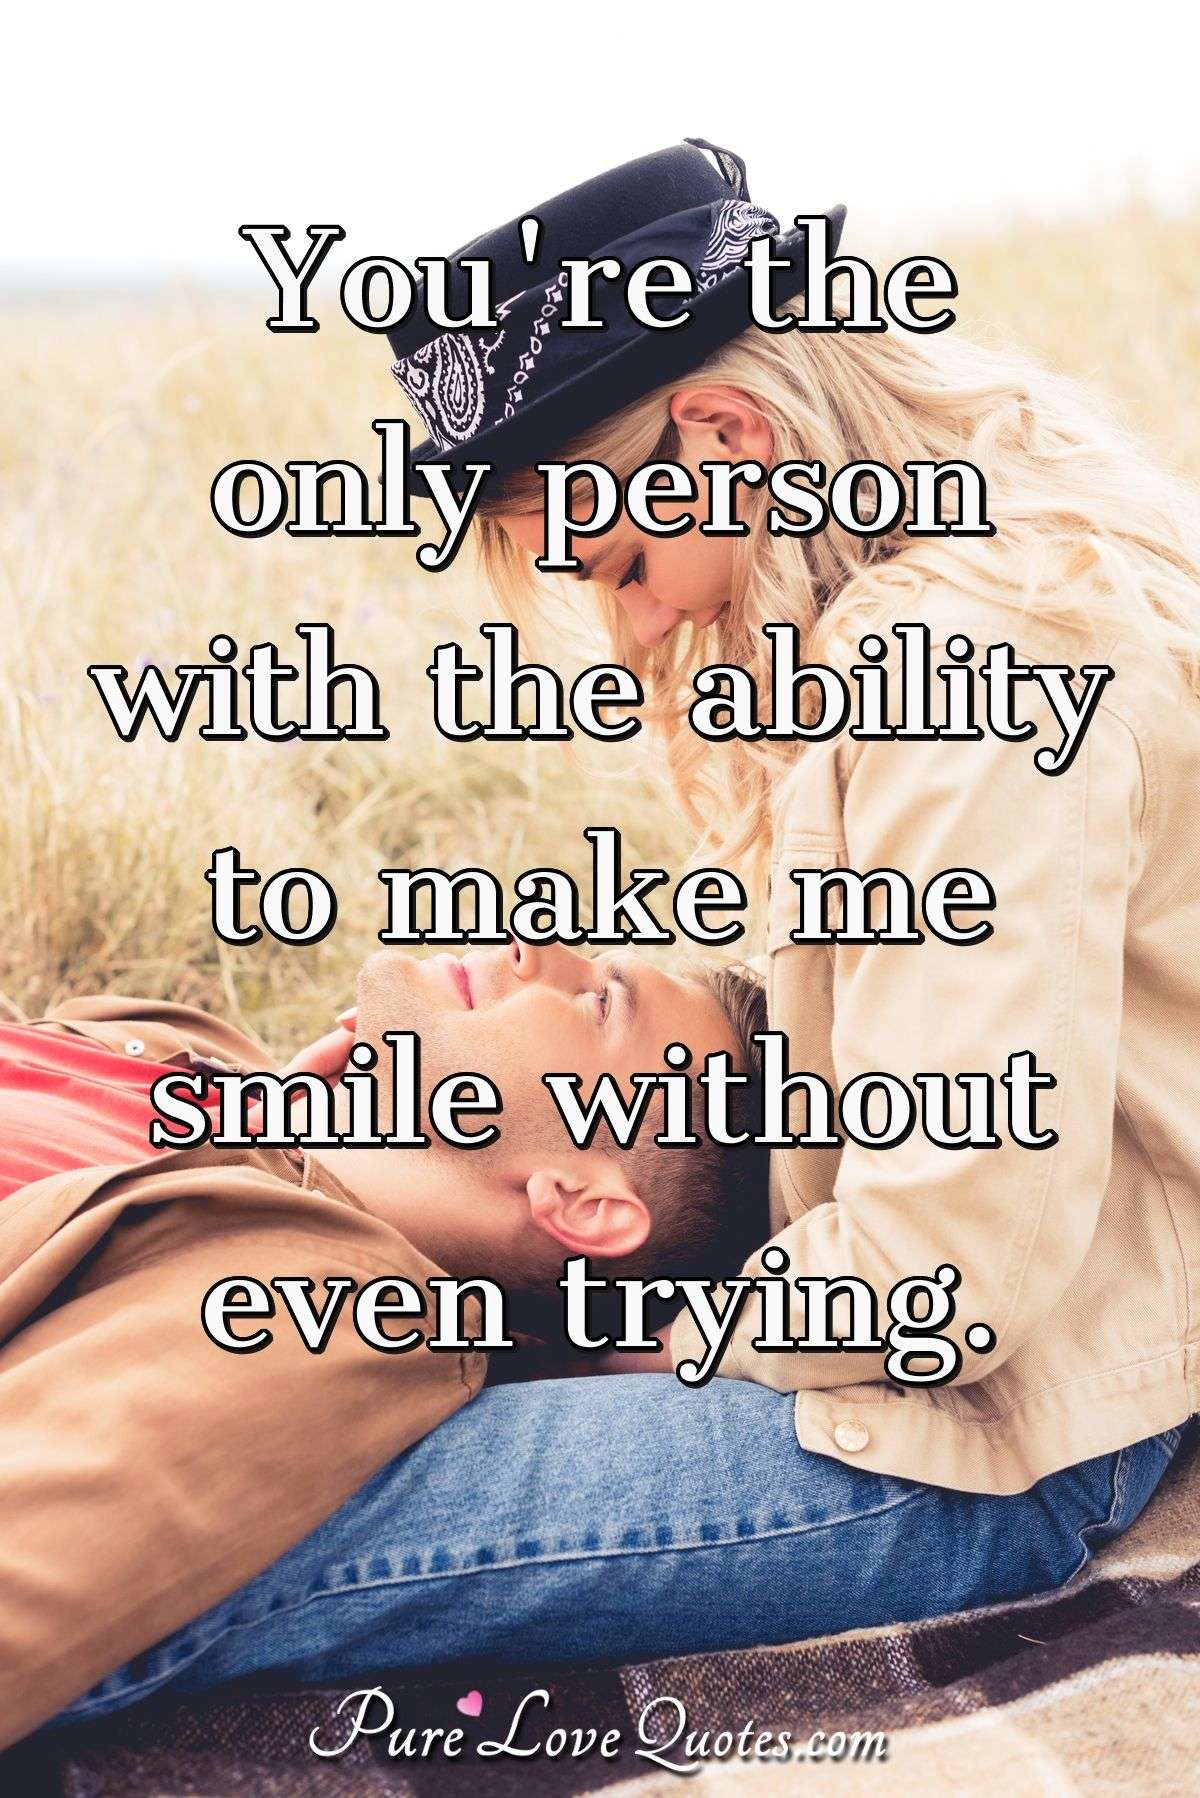 You're the only person with the ability to make me smile without even trying. - Anonymous